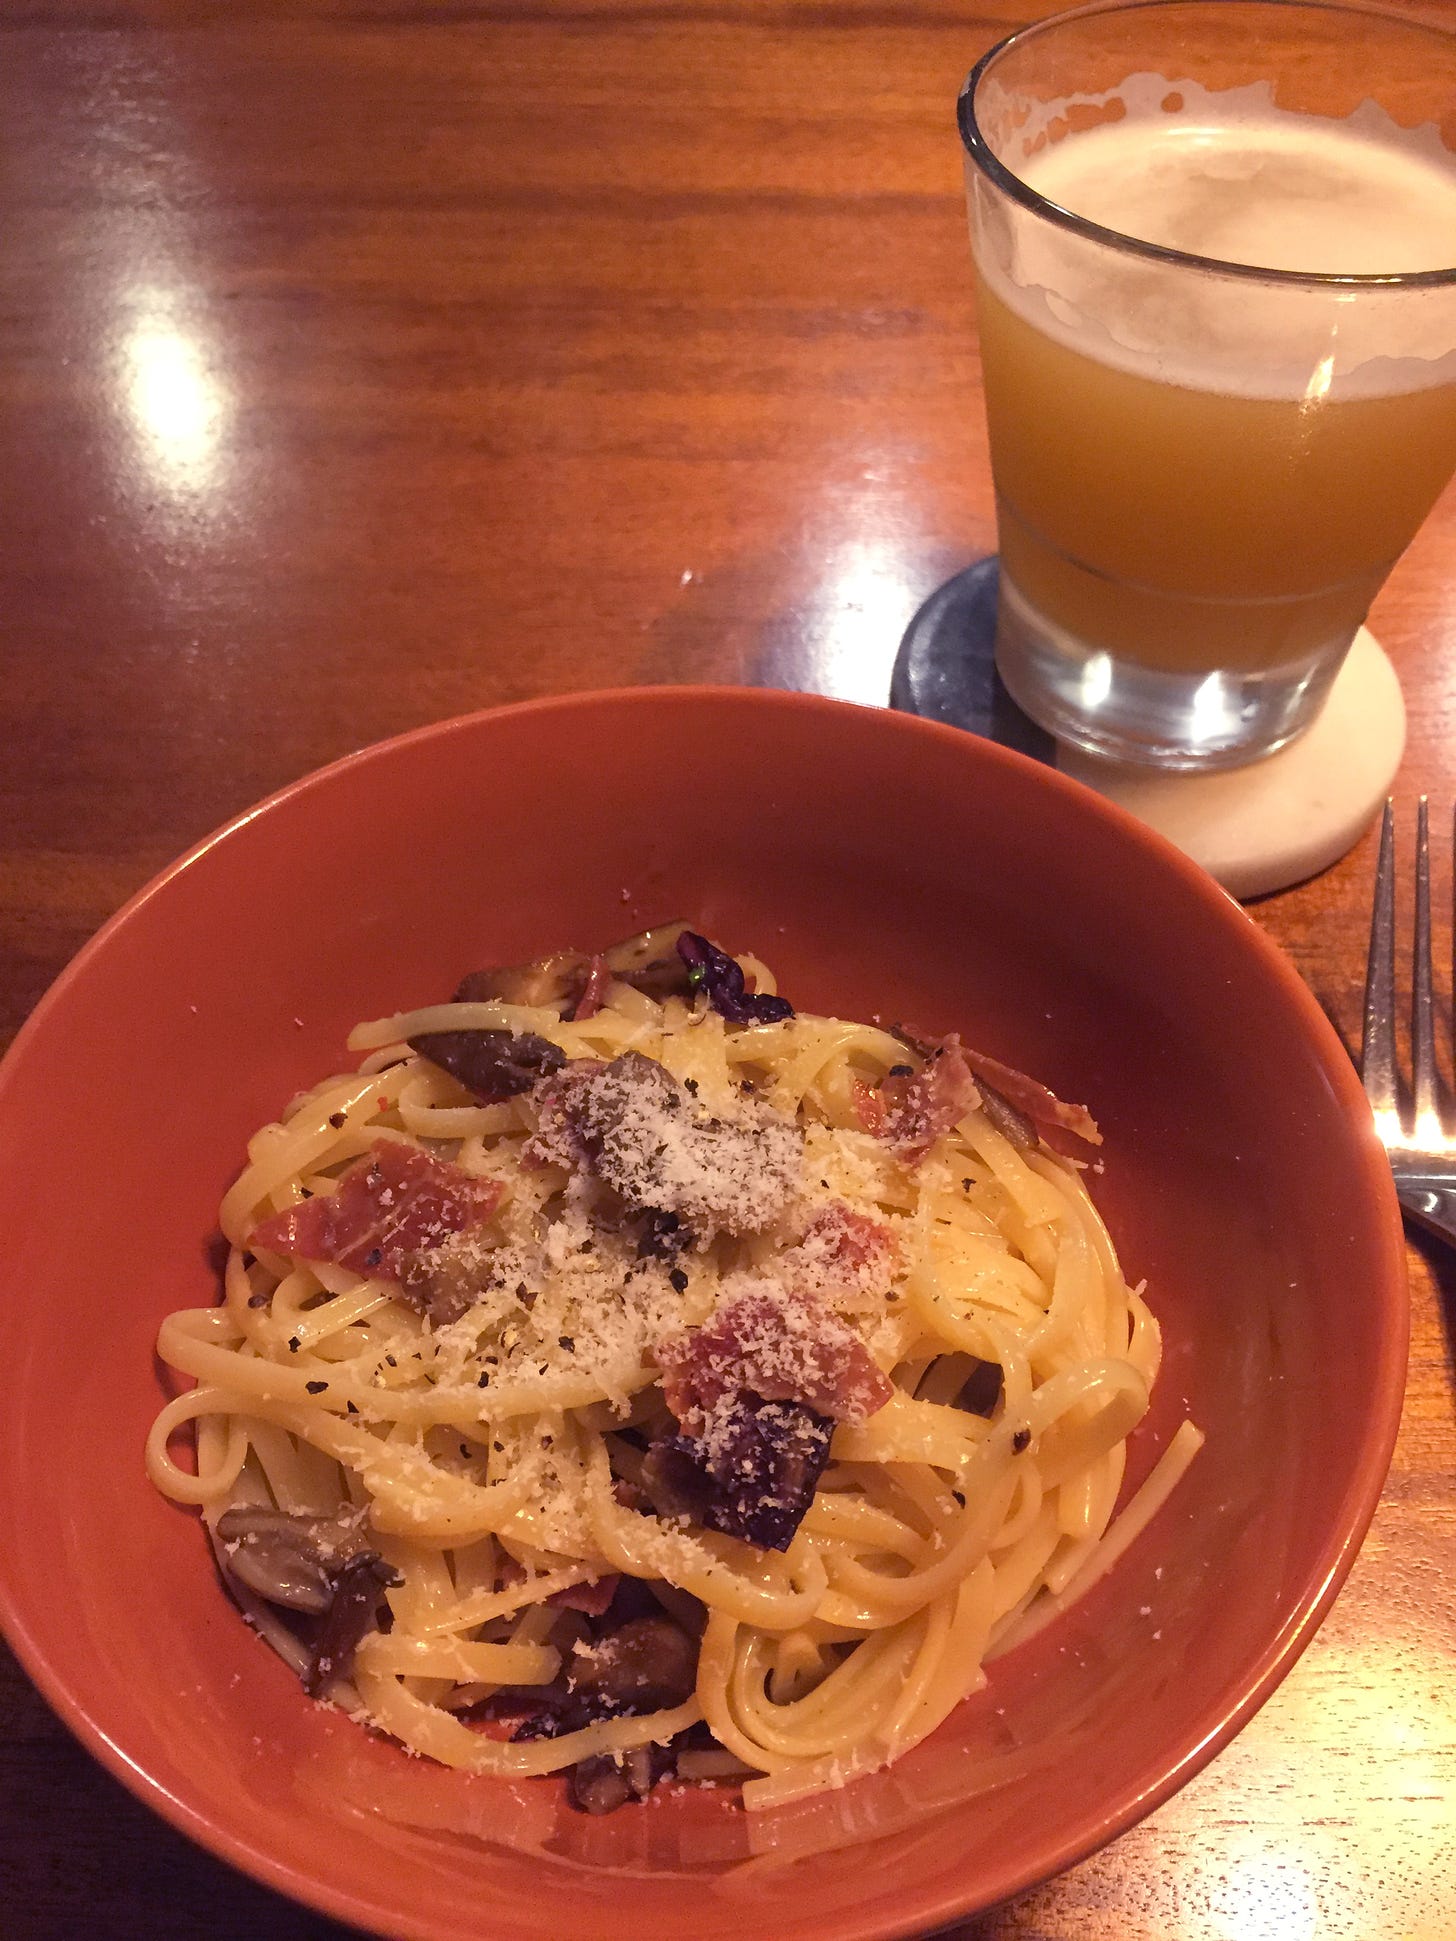 An orange bowl of linguine carbonara with dark purple pieces of radicchio and chopped oyster mushrooms visible throughout. Pecorino and ground pepper are dusted over the top. A glass of hazy IPA sits above and to the right of the bowl on a coaster.